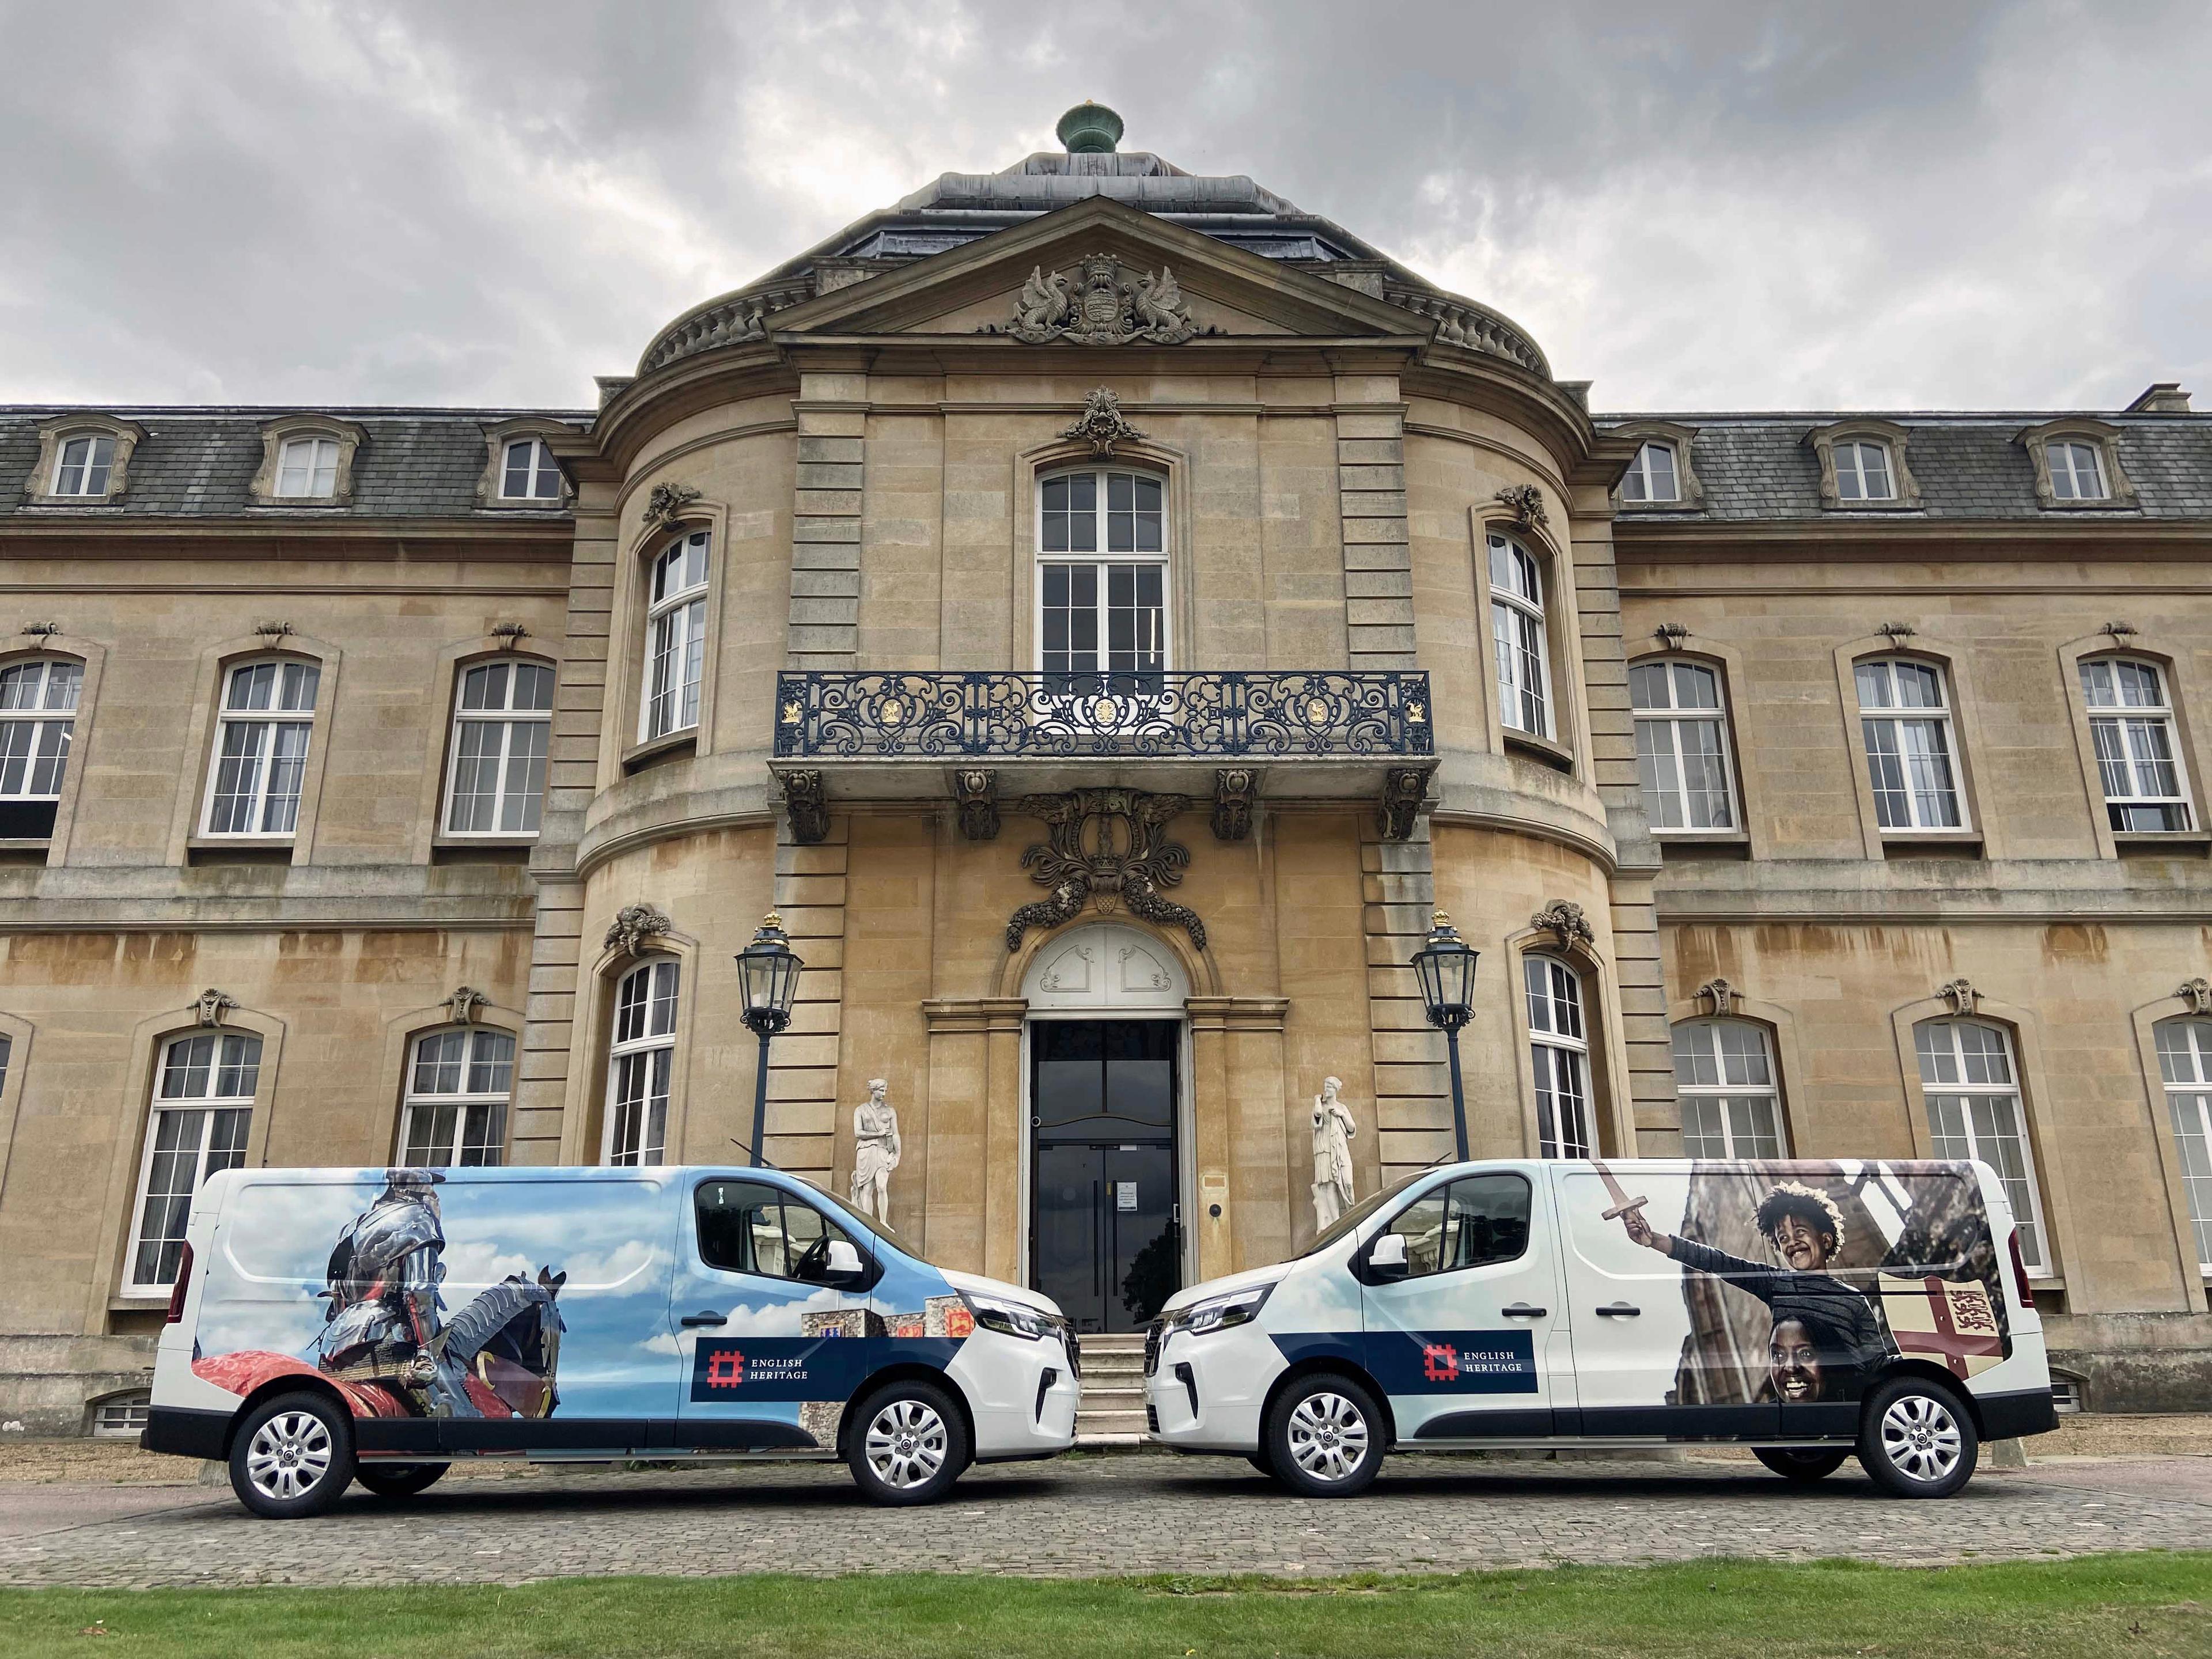 Image of two Nissan Primastar vans with bespoke livery, parked outside the Grade I listed English Heritage property, Wrest Park in Bedfordshire